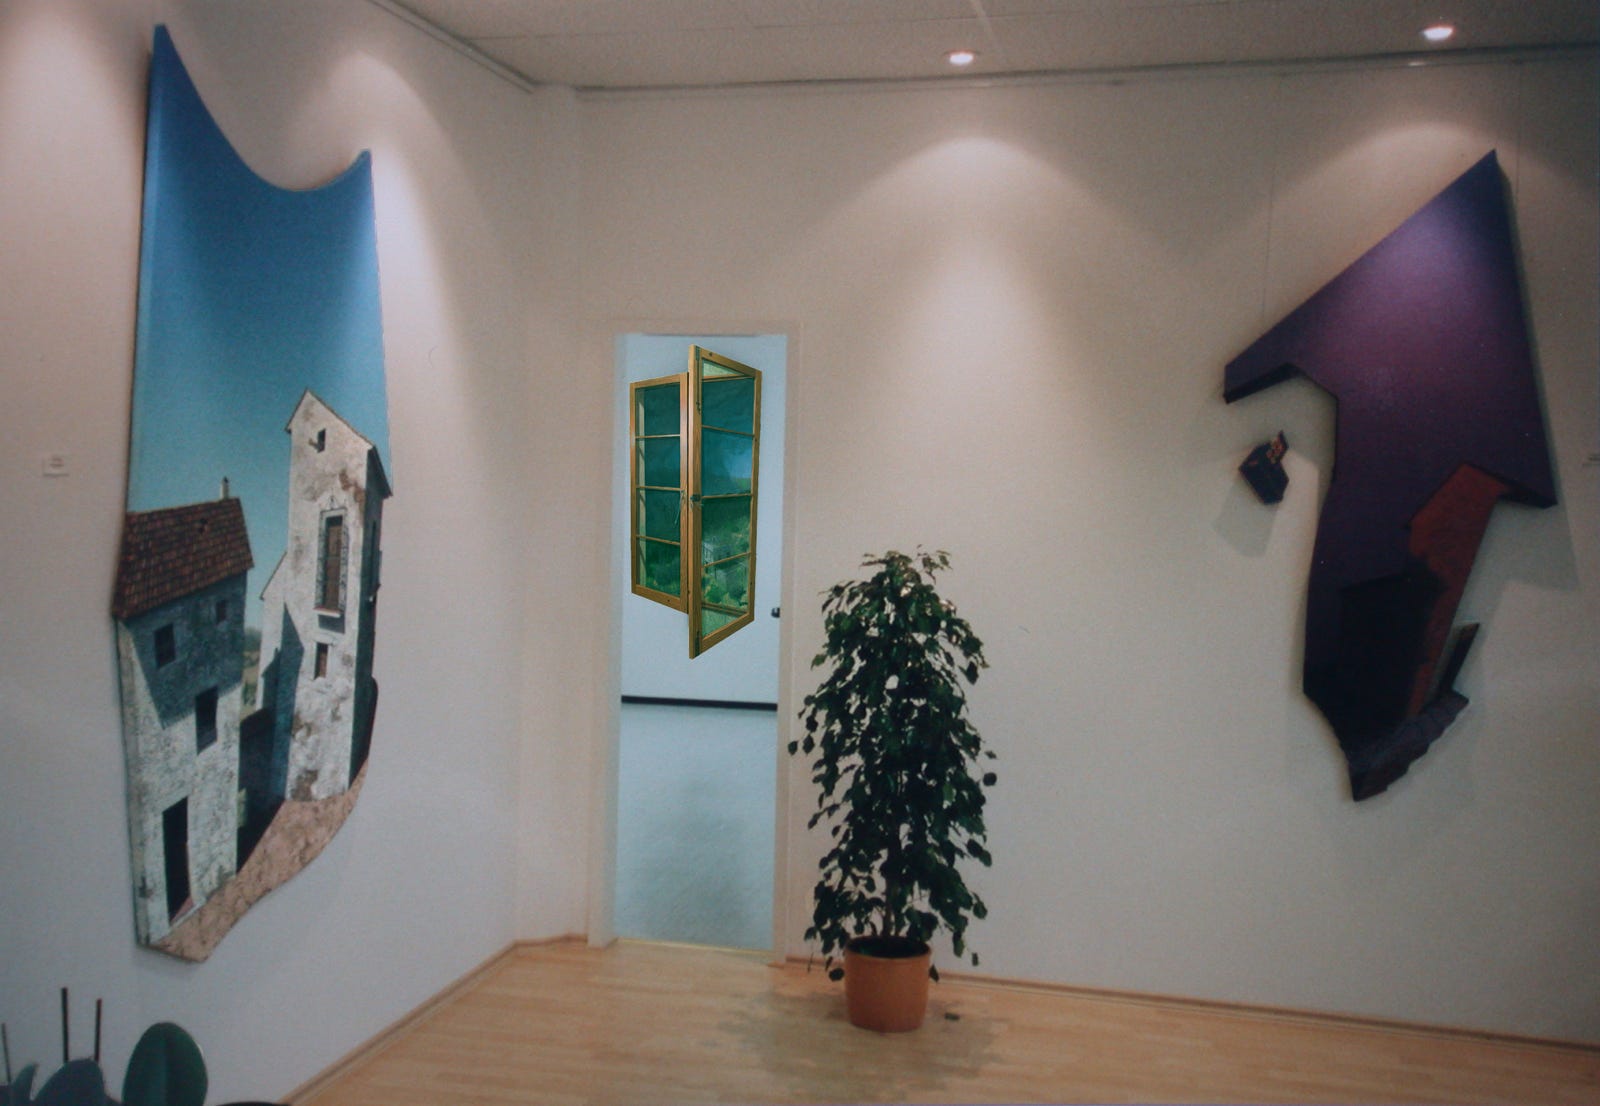 Photo of an exhibition of Paul Critchley's paintings at Zahn Art, Grimma, Germany in 1996 